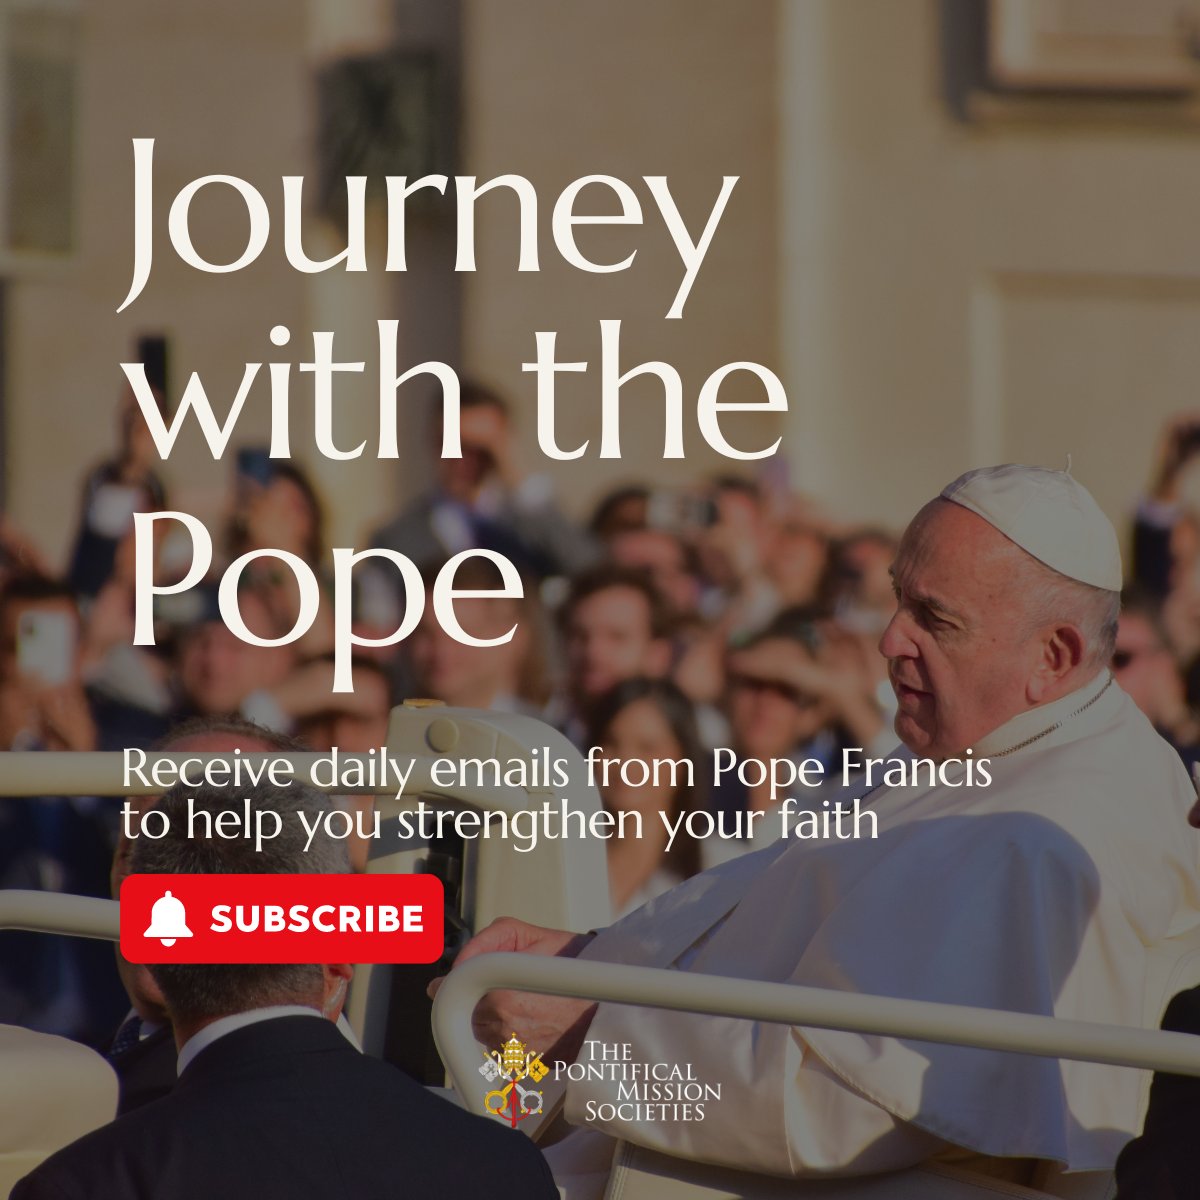 We invite you to journey along with the Pope as he provides reflections, and words of encouragement to help you deepen your understanding of the Church’s mission. Subscribe for free today at missio.lpages.co/advice-from-po…

#JourneyWithThePope #DailyMessage #TPMS